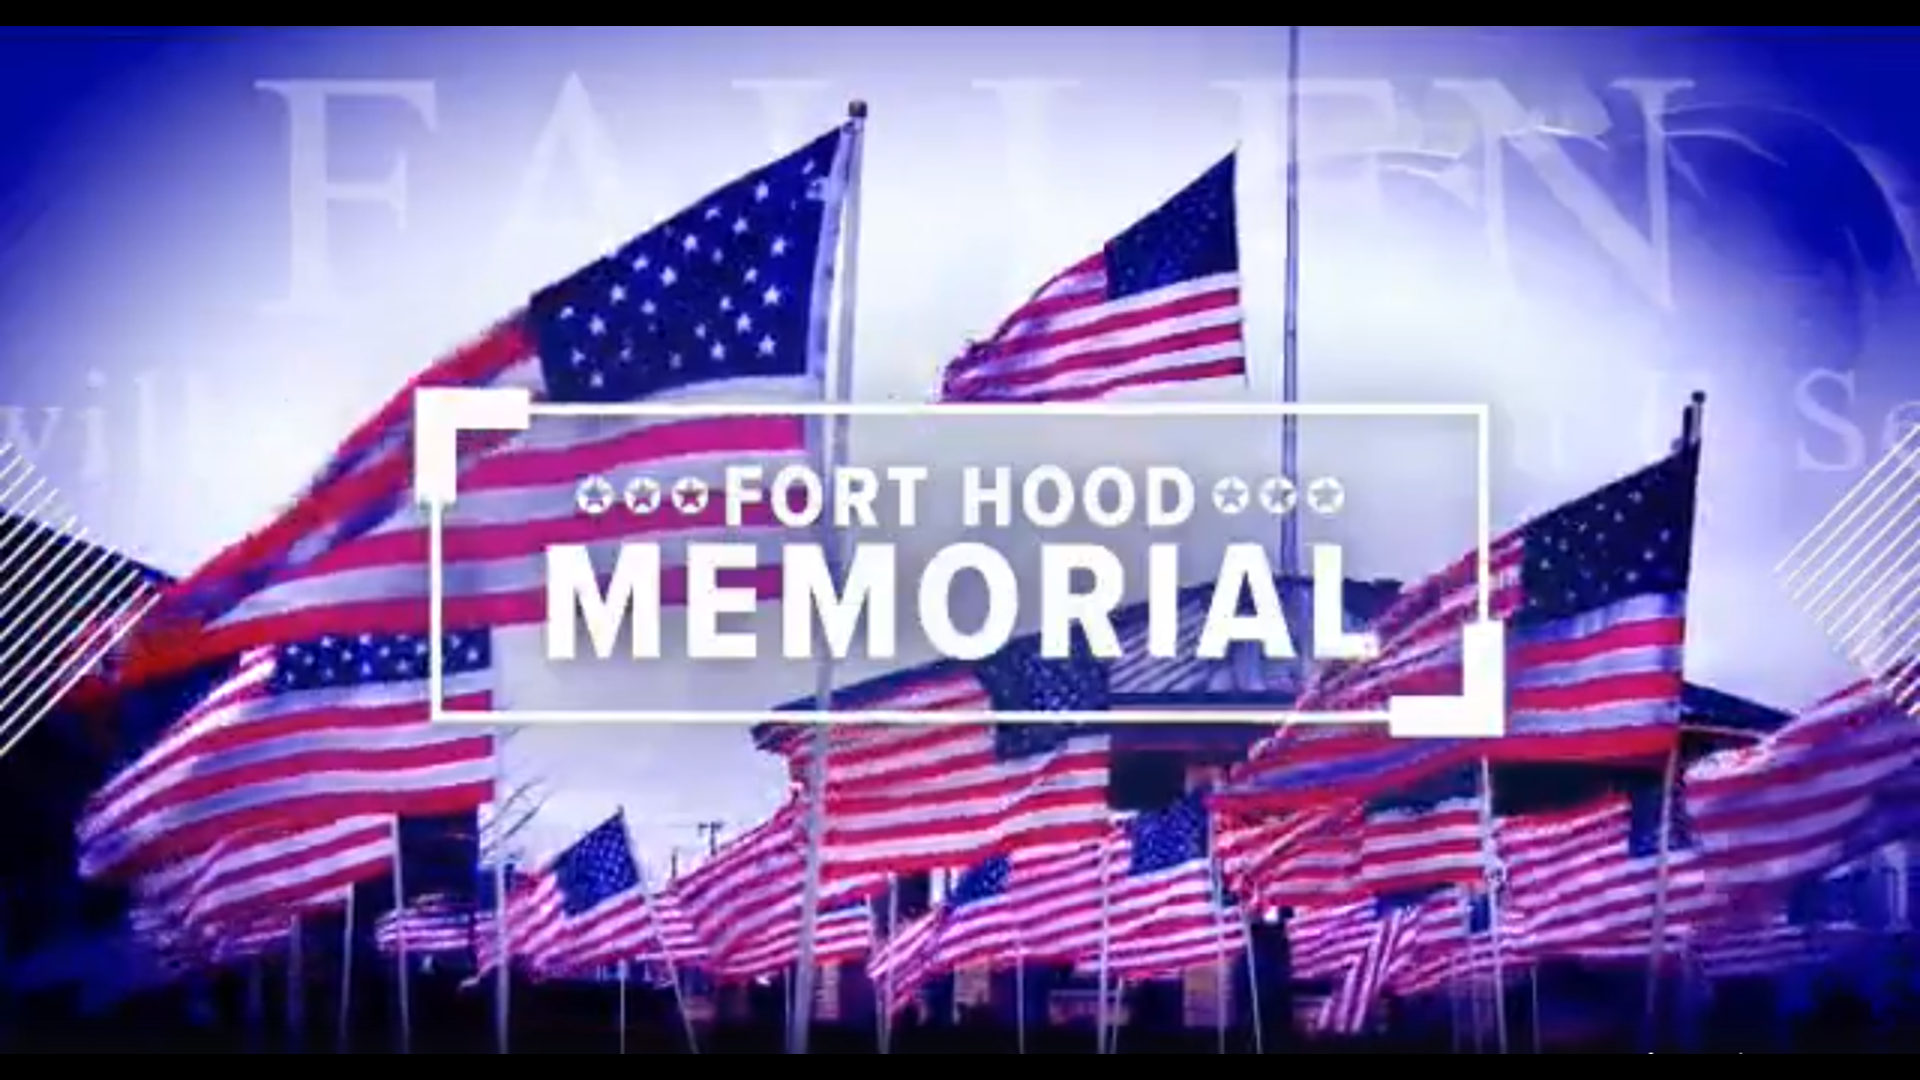 The 14 victims who were killed and the 30 wounded were honored and remembered in a ceremony at the Ft. Hood Memorial in Killeen.